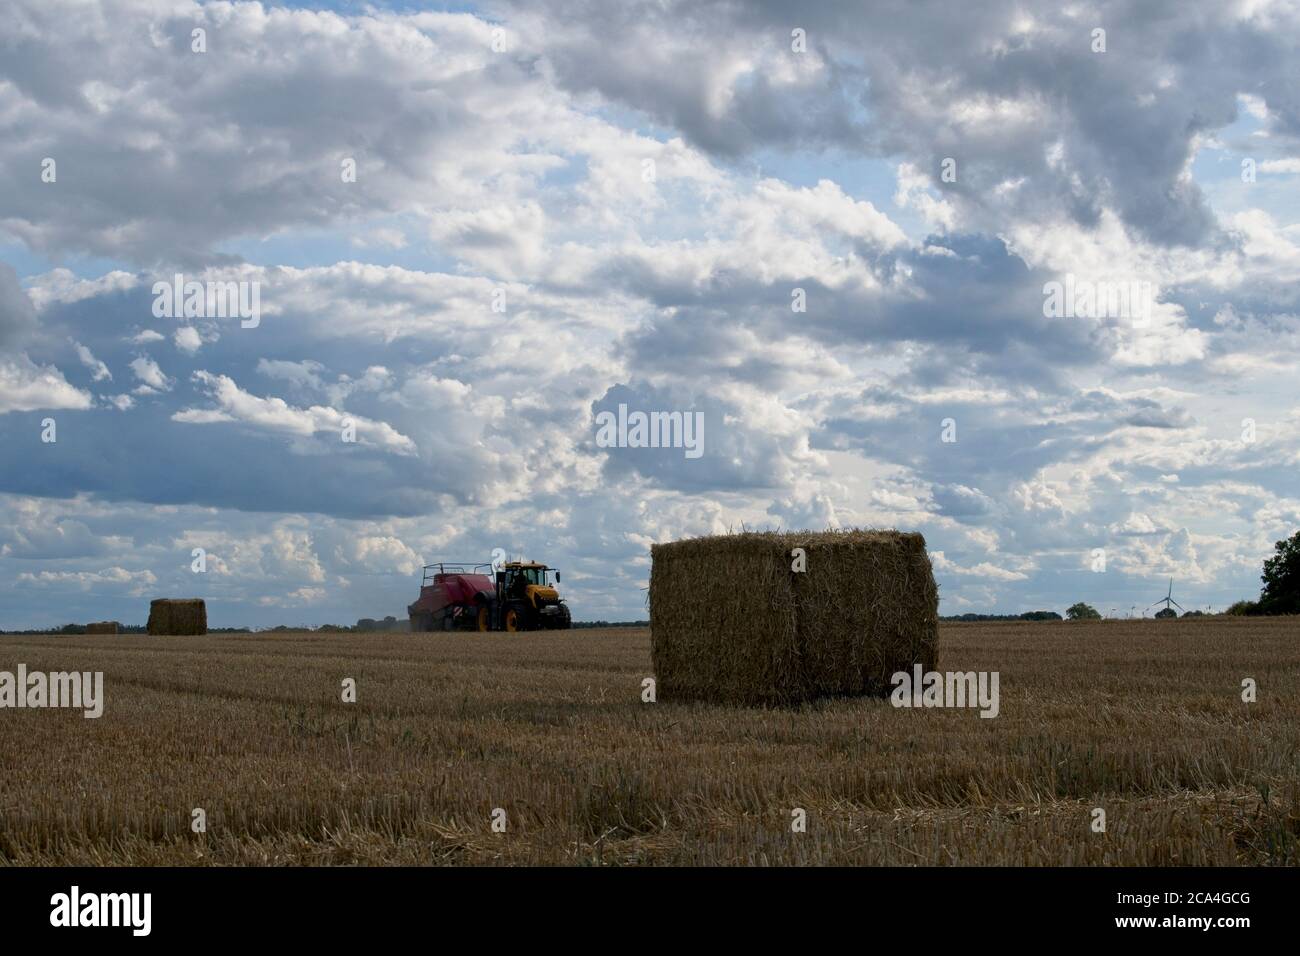 Baling following the combine harvester Baling following the combine harvester. Tractor towing bailer ejecting bale onto the ground Moving into picture Stock Photo